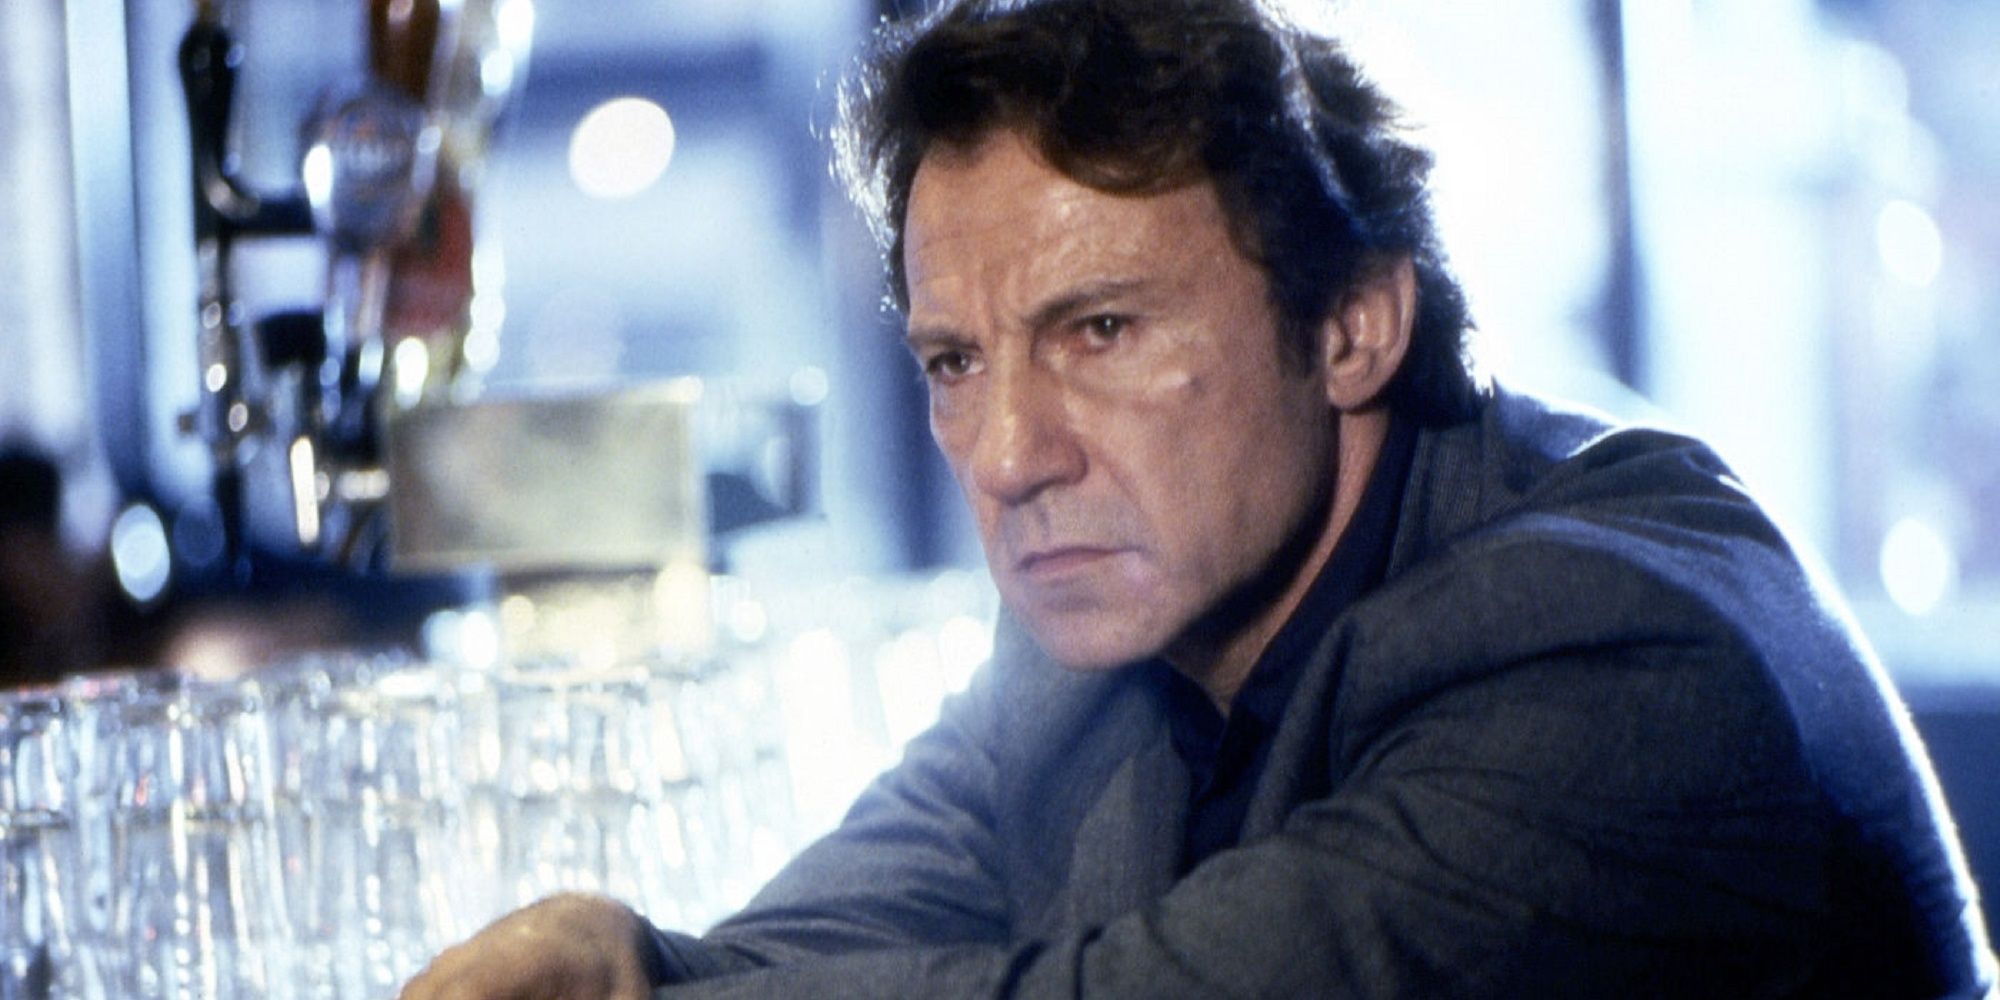 Harvey Keitel sitting at a bar looking miserable in 'Bad Lieutenent.'